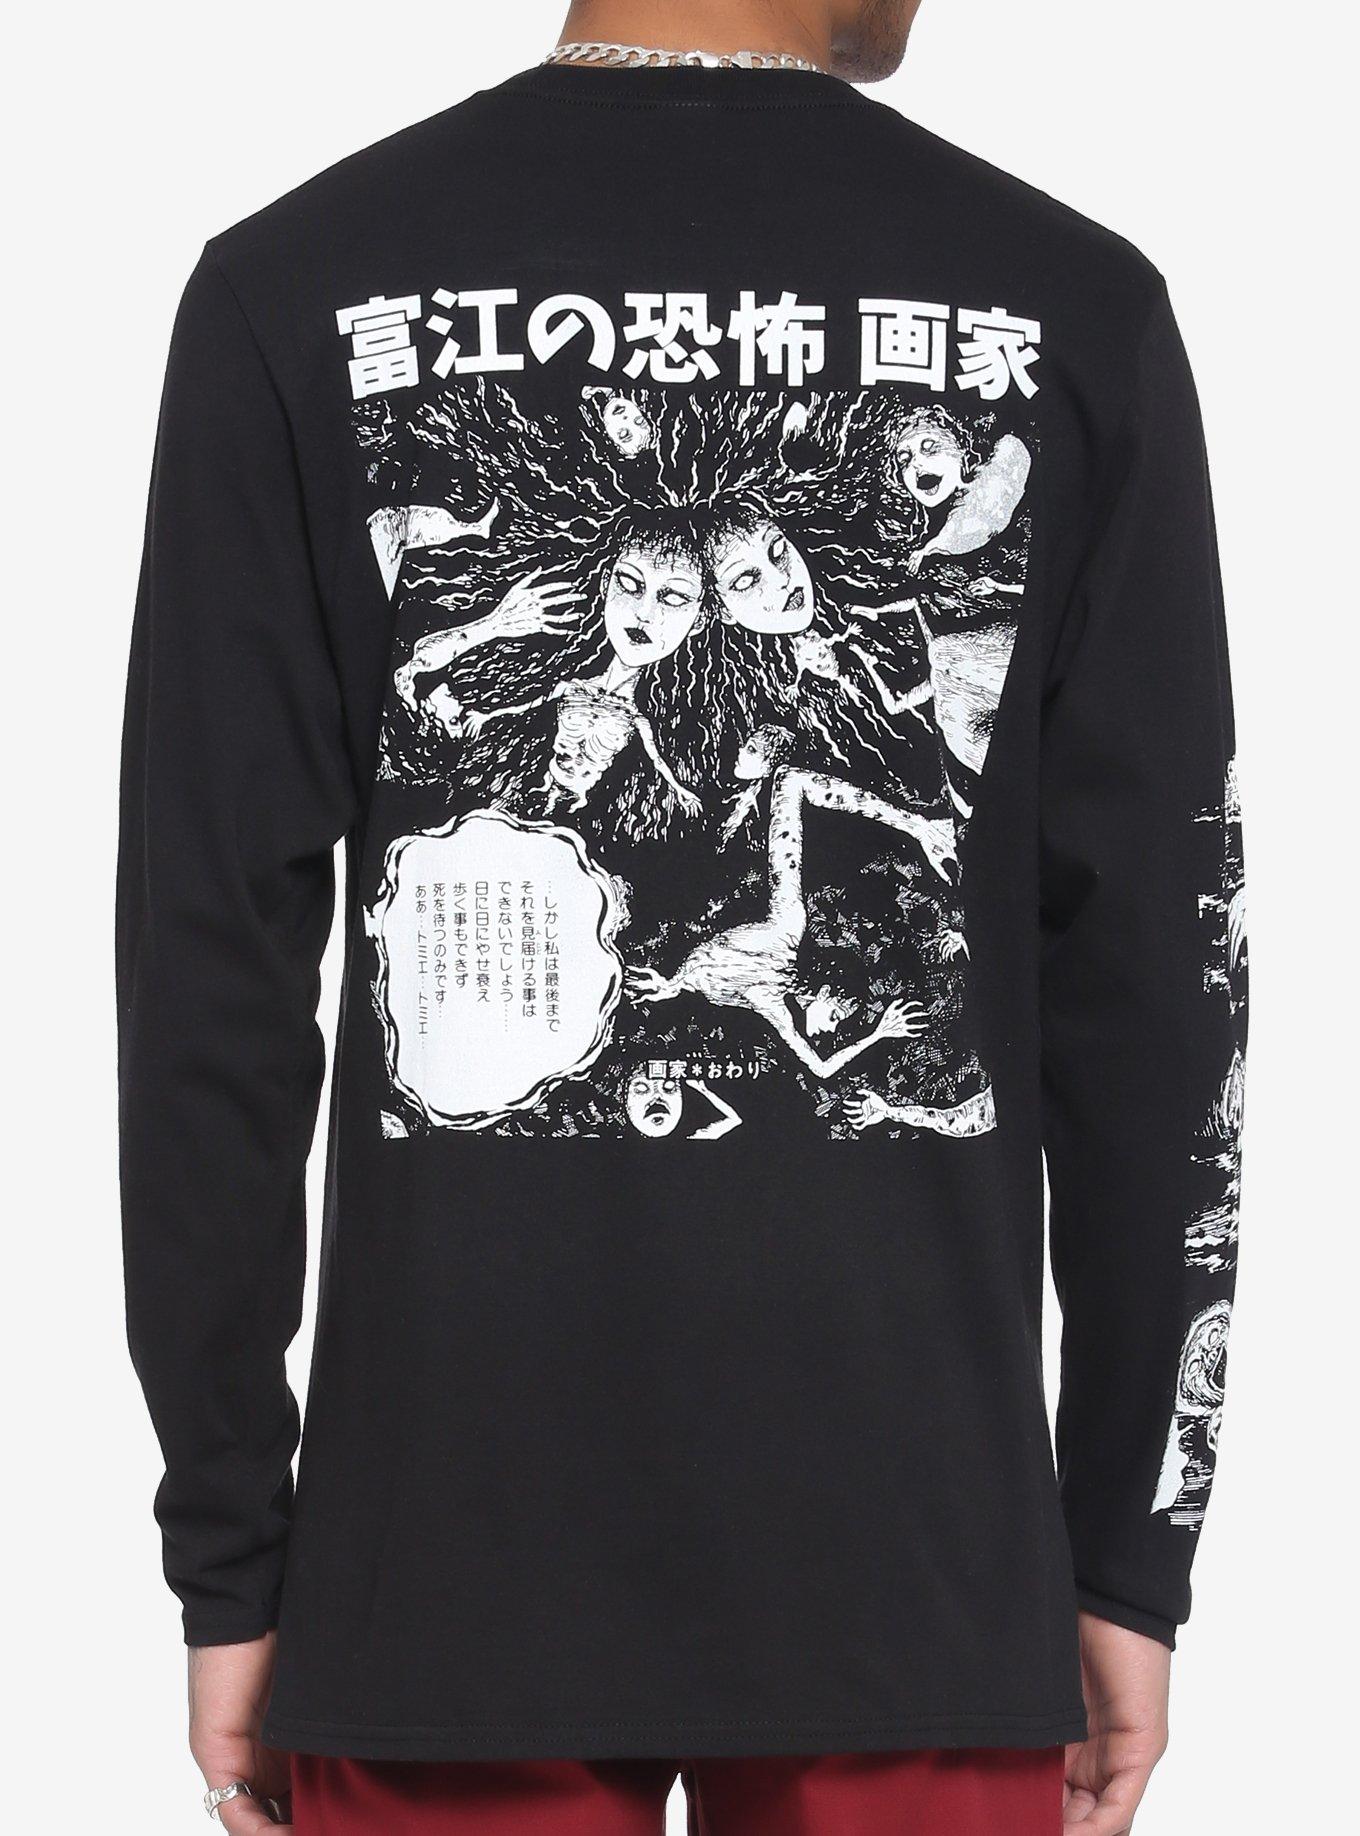 Bought this cool junji ito shirt today, but i don't remember what